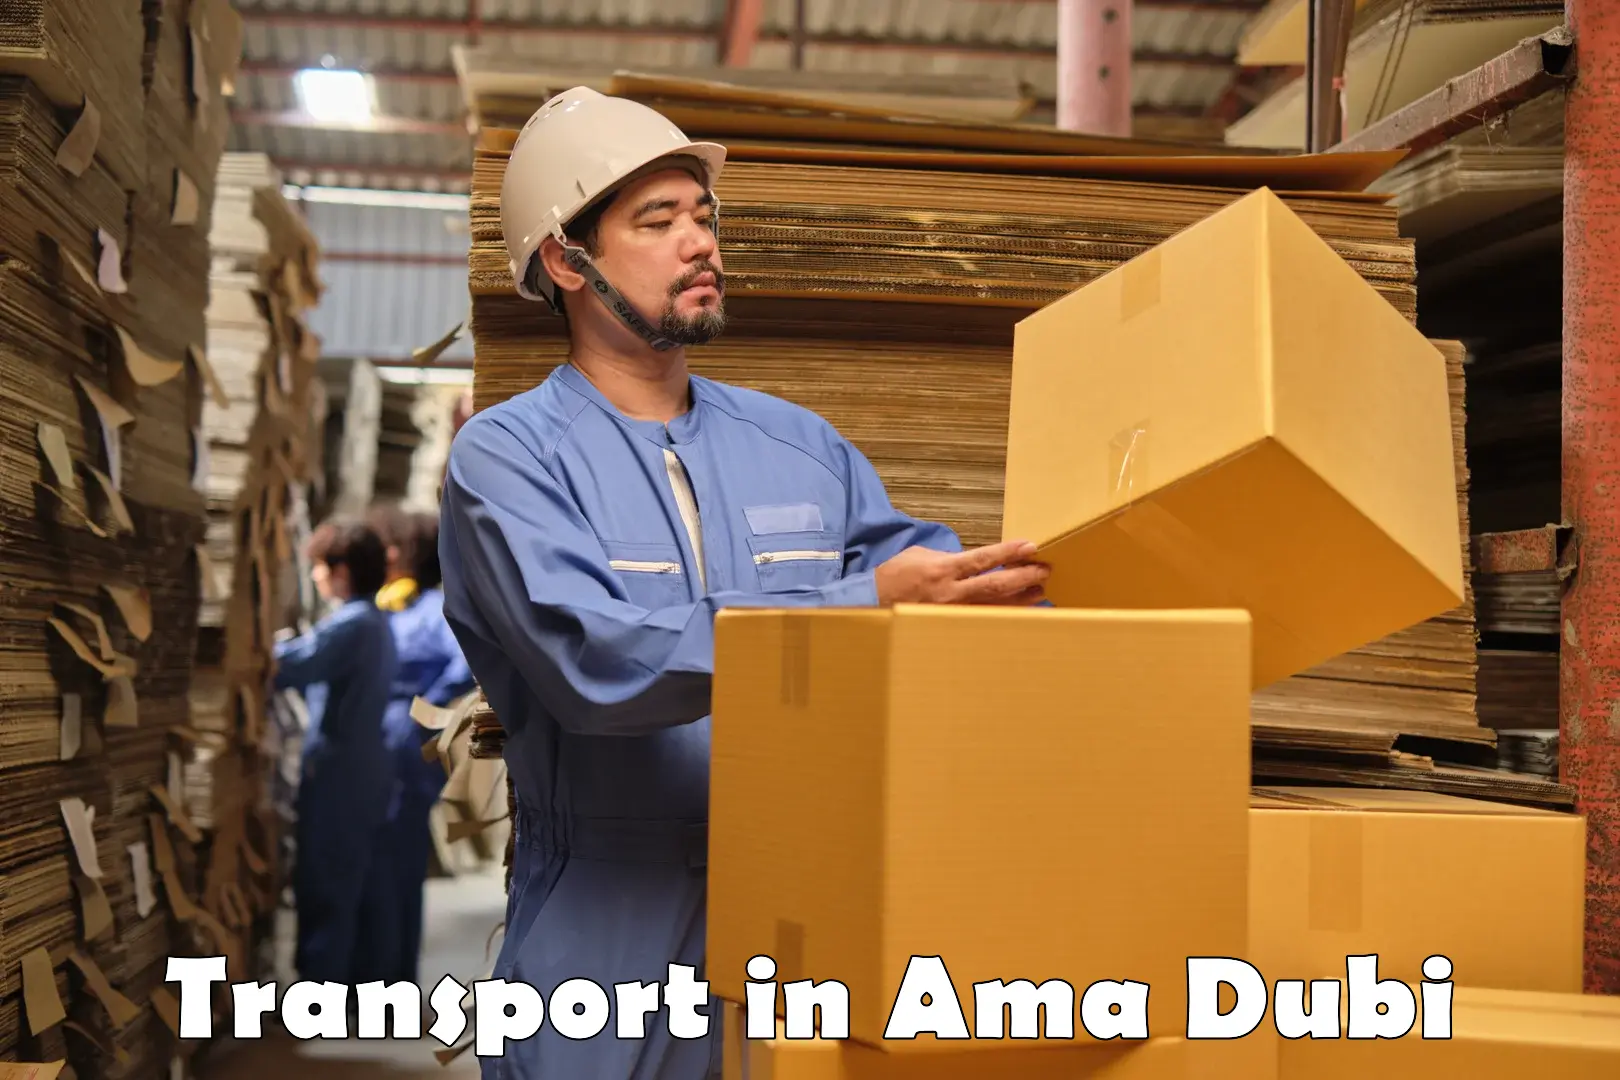 Vehicle transport services in Ama Dubi